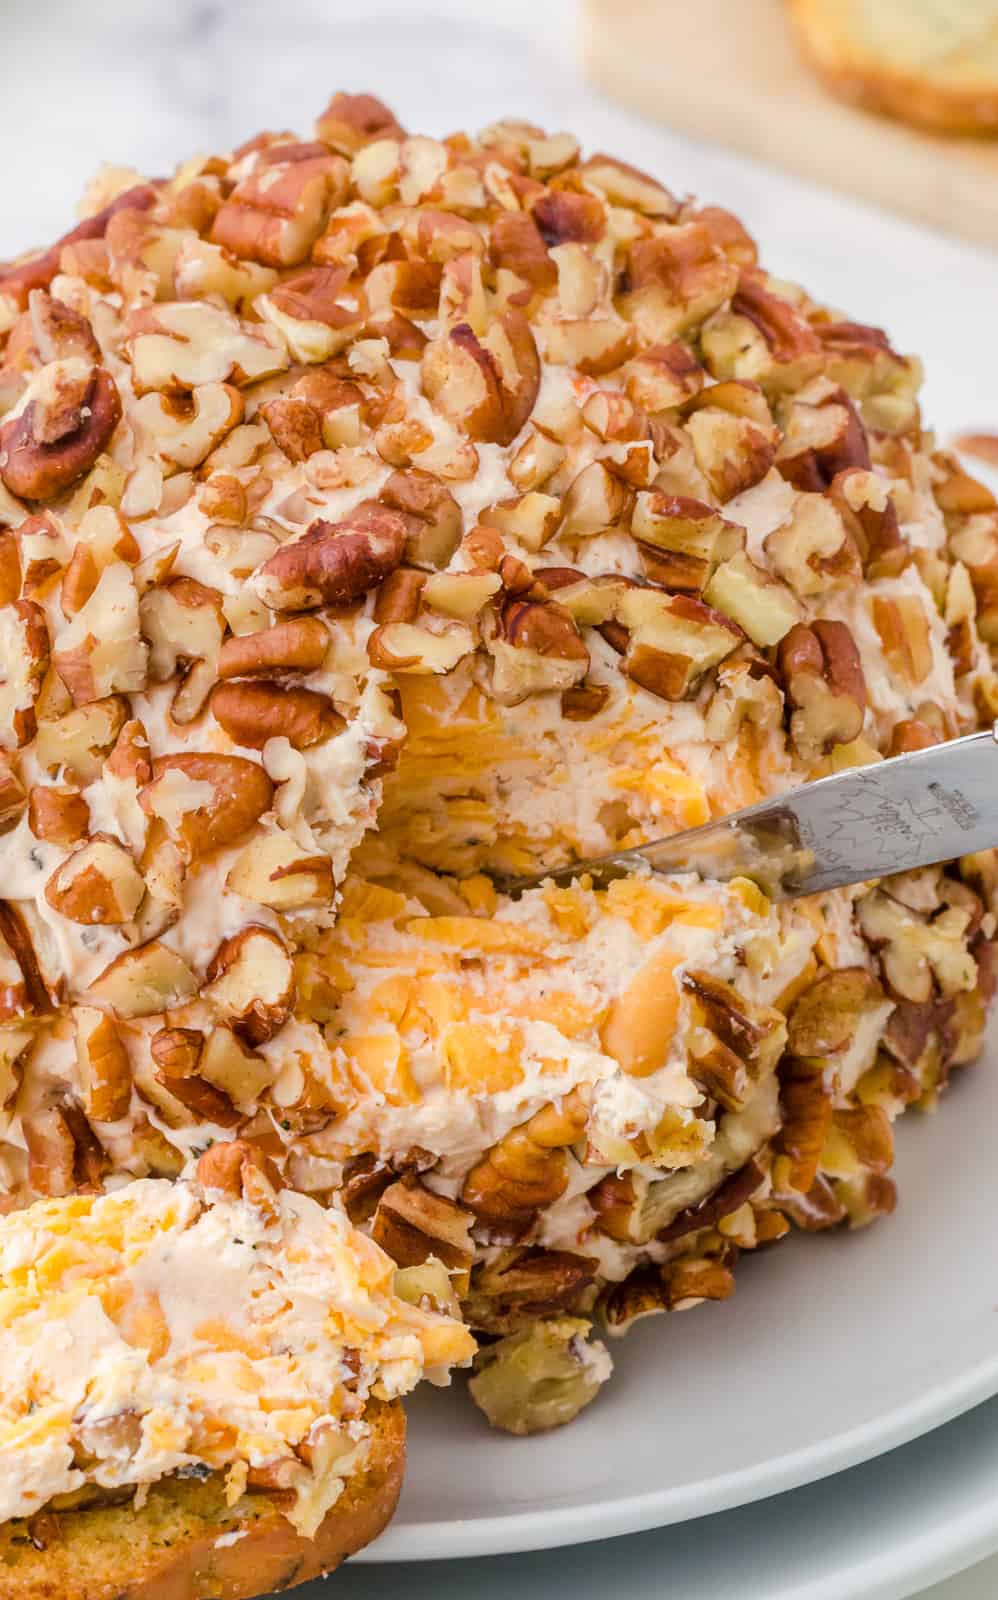 Close up of Sun-Dried Tomato Cheese Ball Recipe showing inside with knife.